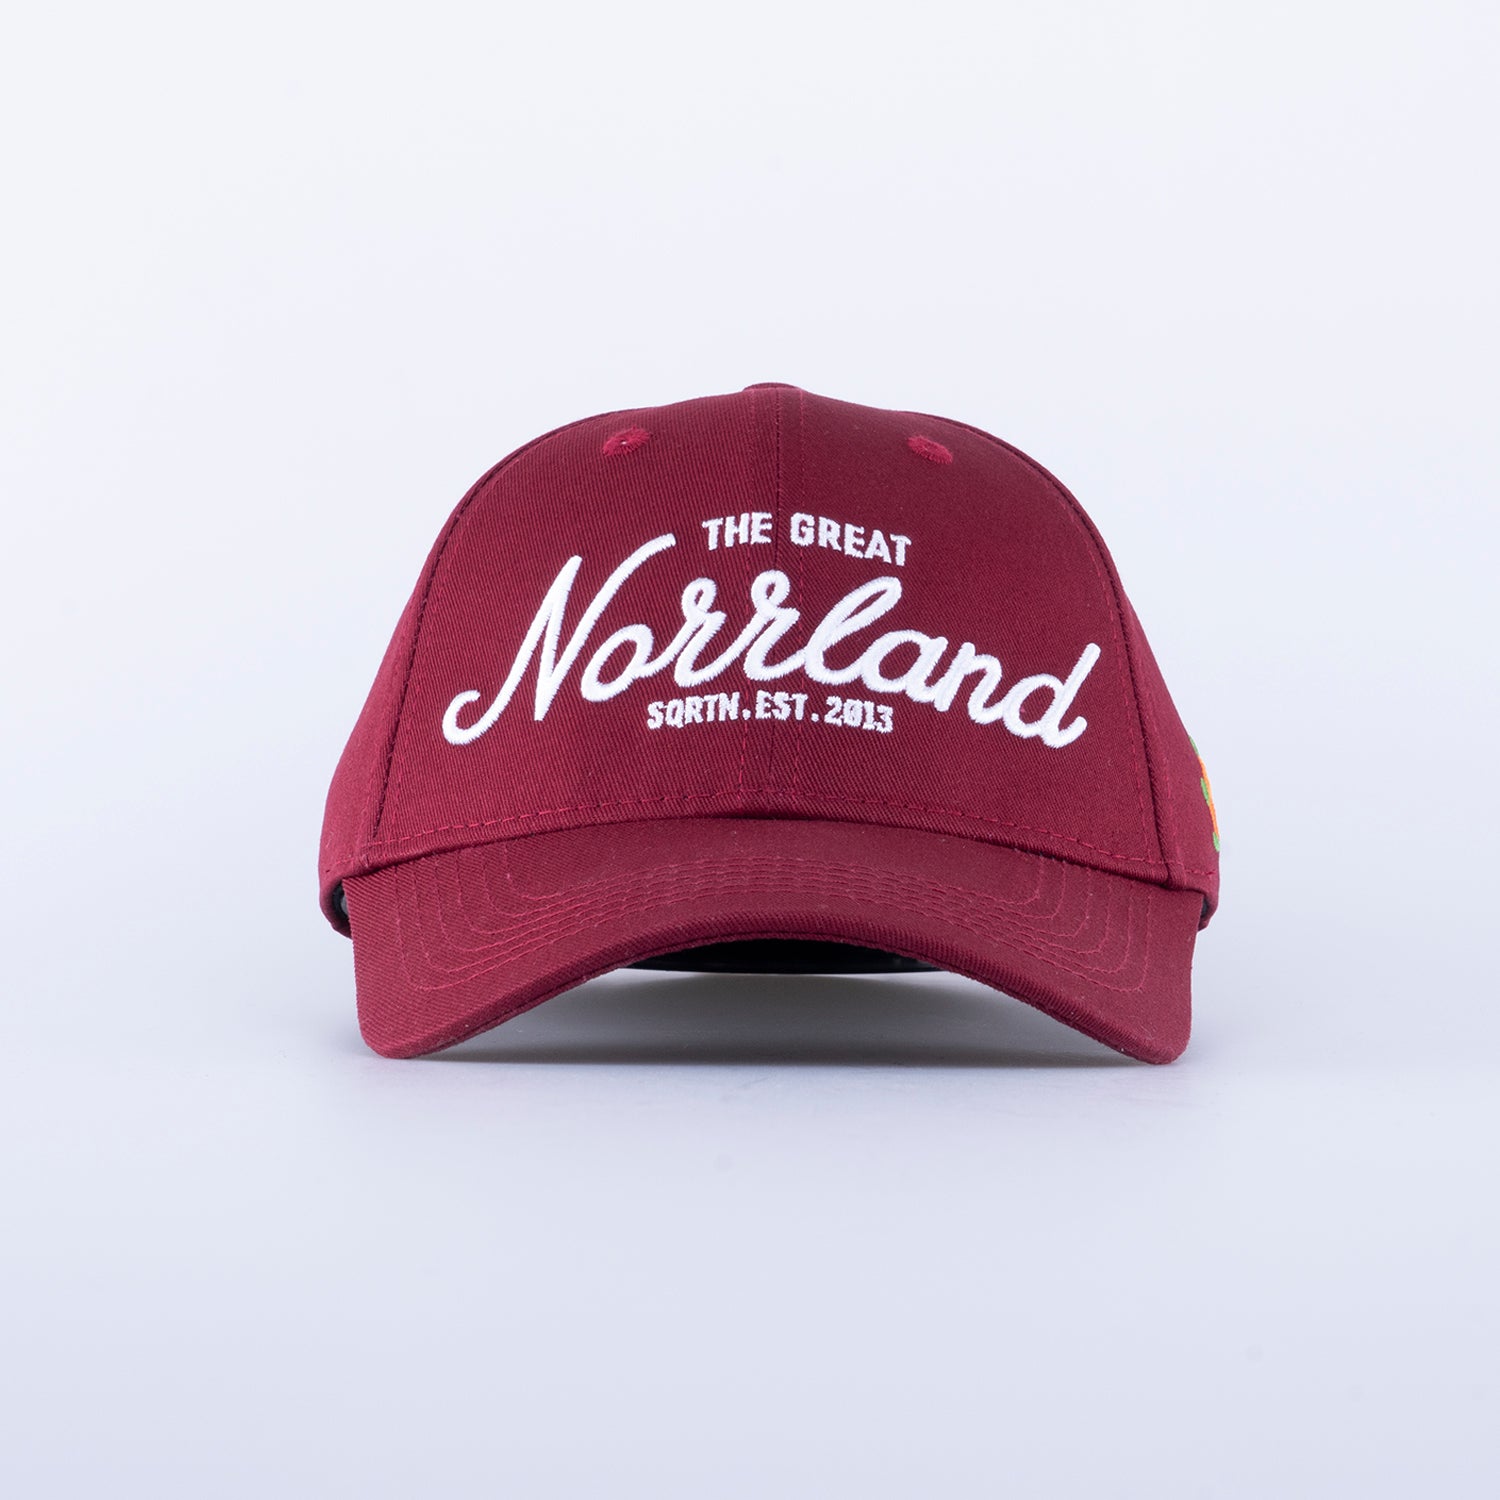 GREAT NORRLAND KEPS - HOOKED MAROON